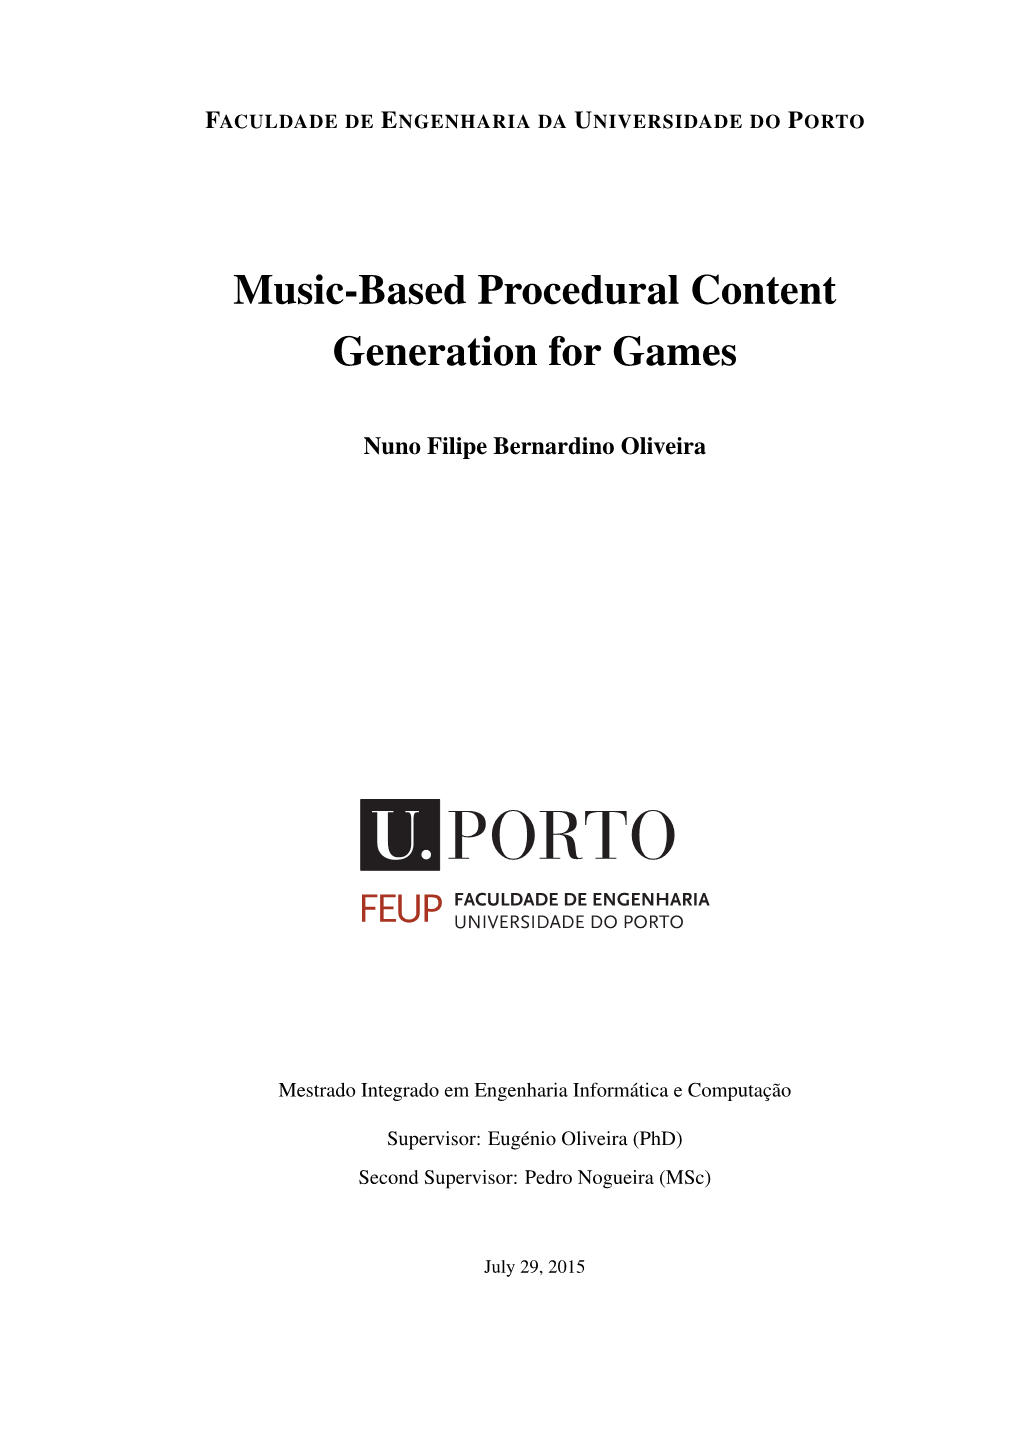 Music-Based Procedural Content Generation for Games